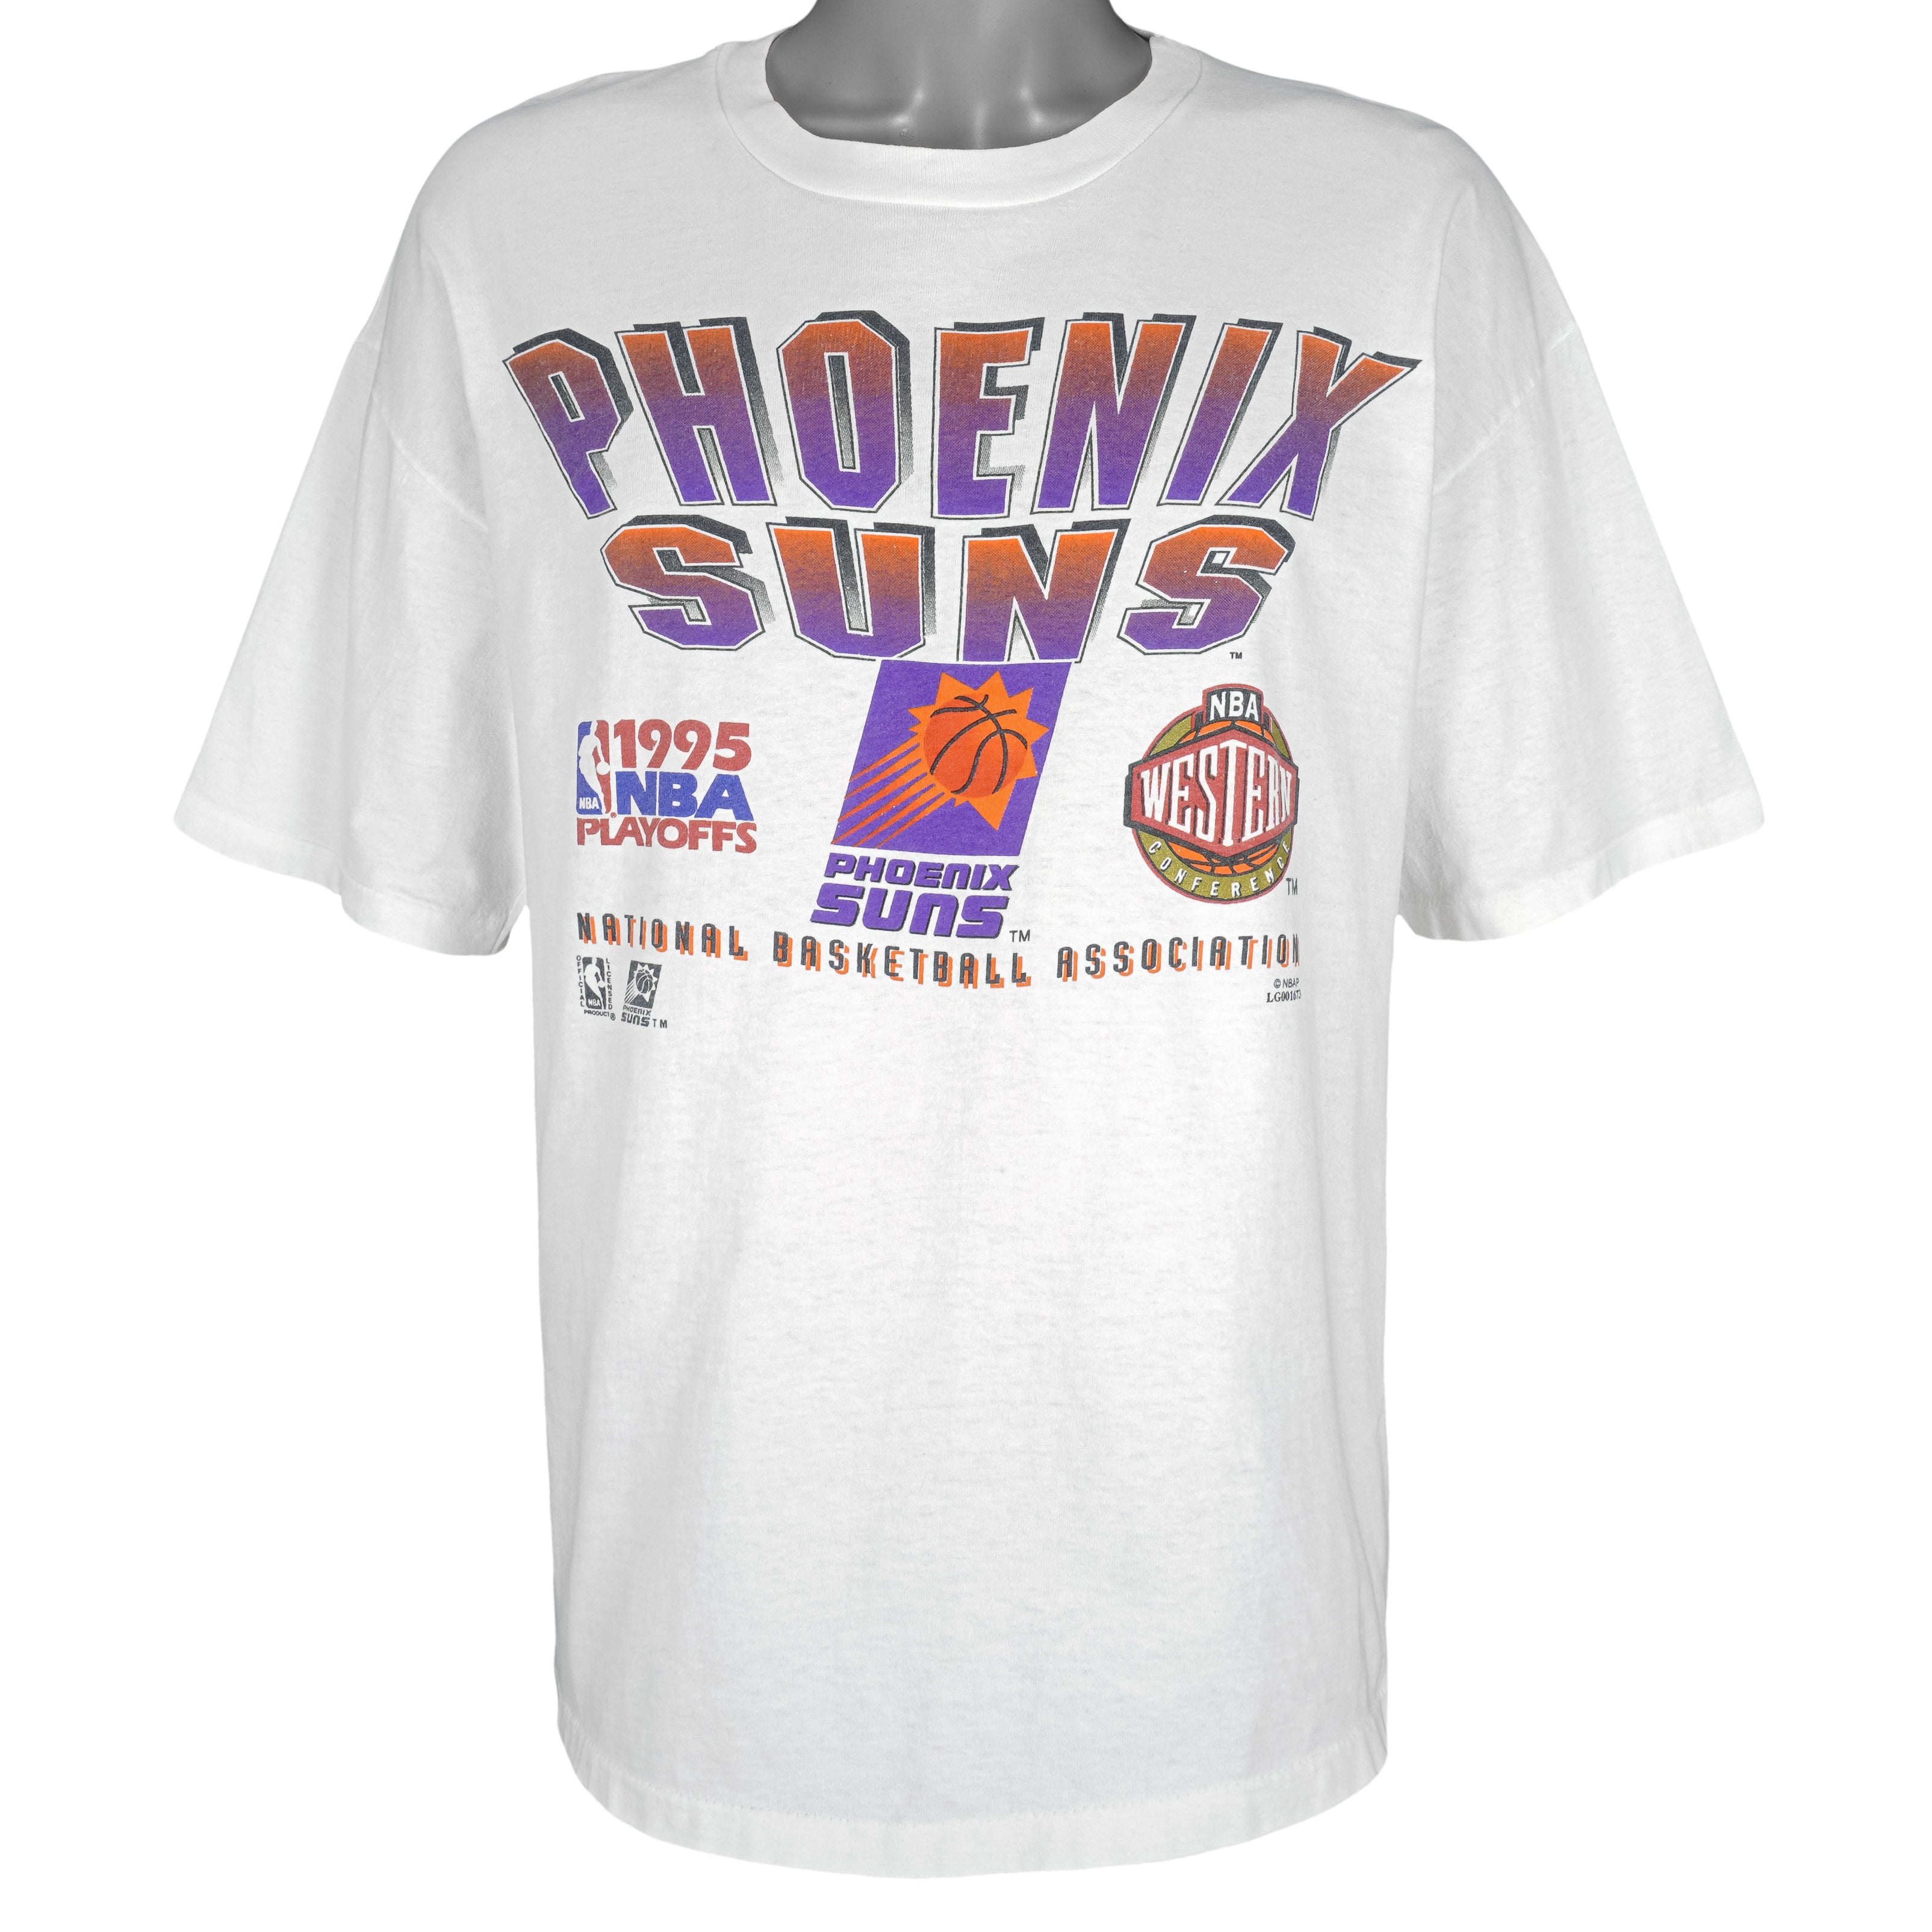 Vintage 90's 1995 NBA PLAYOFFS Western Conference on White Color T-Shirt  Adult Extra Large Fit